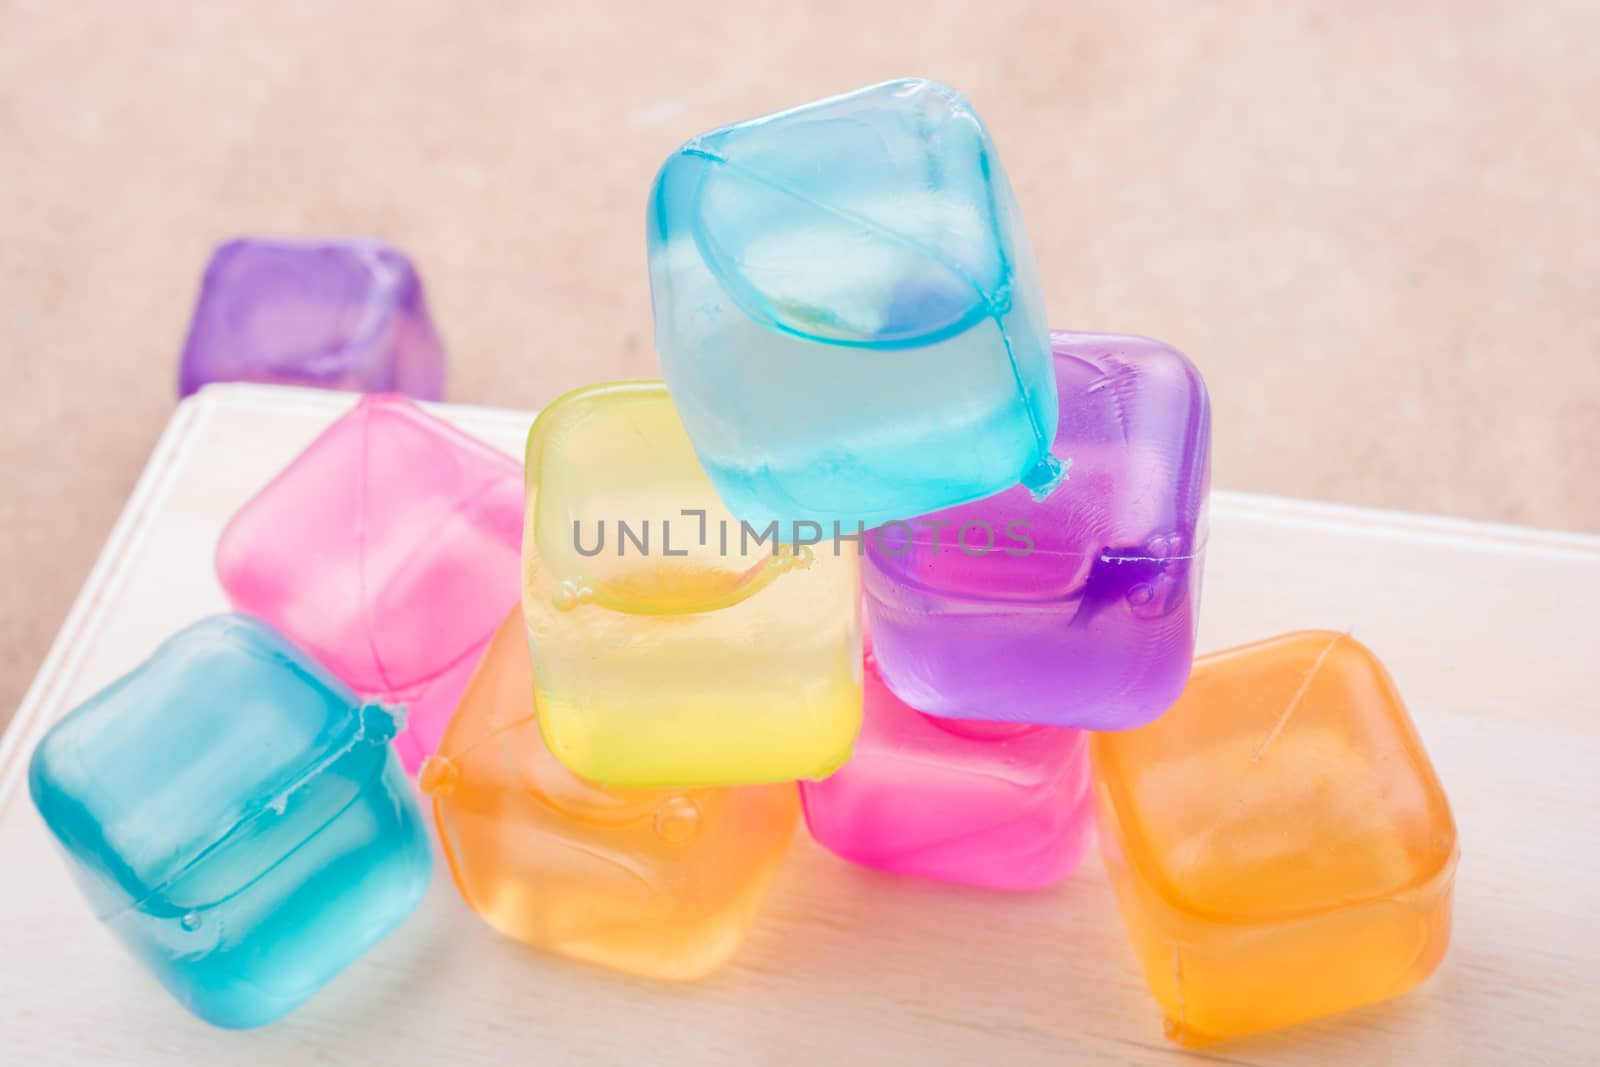 Fake colorful ice cubes on a brown background